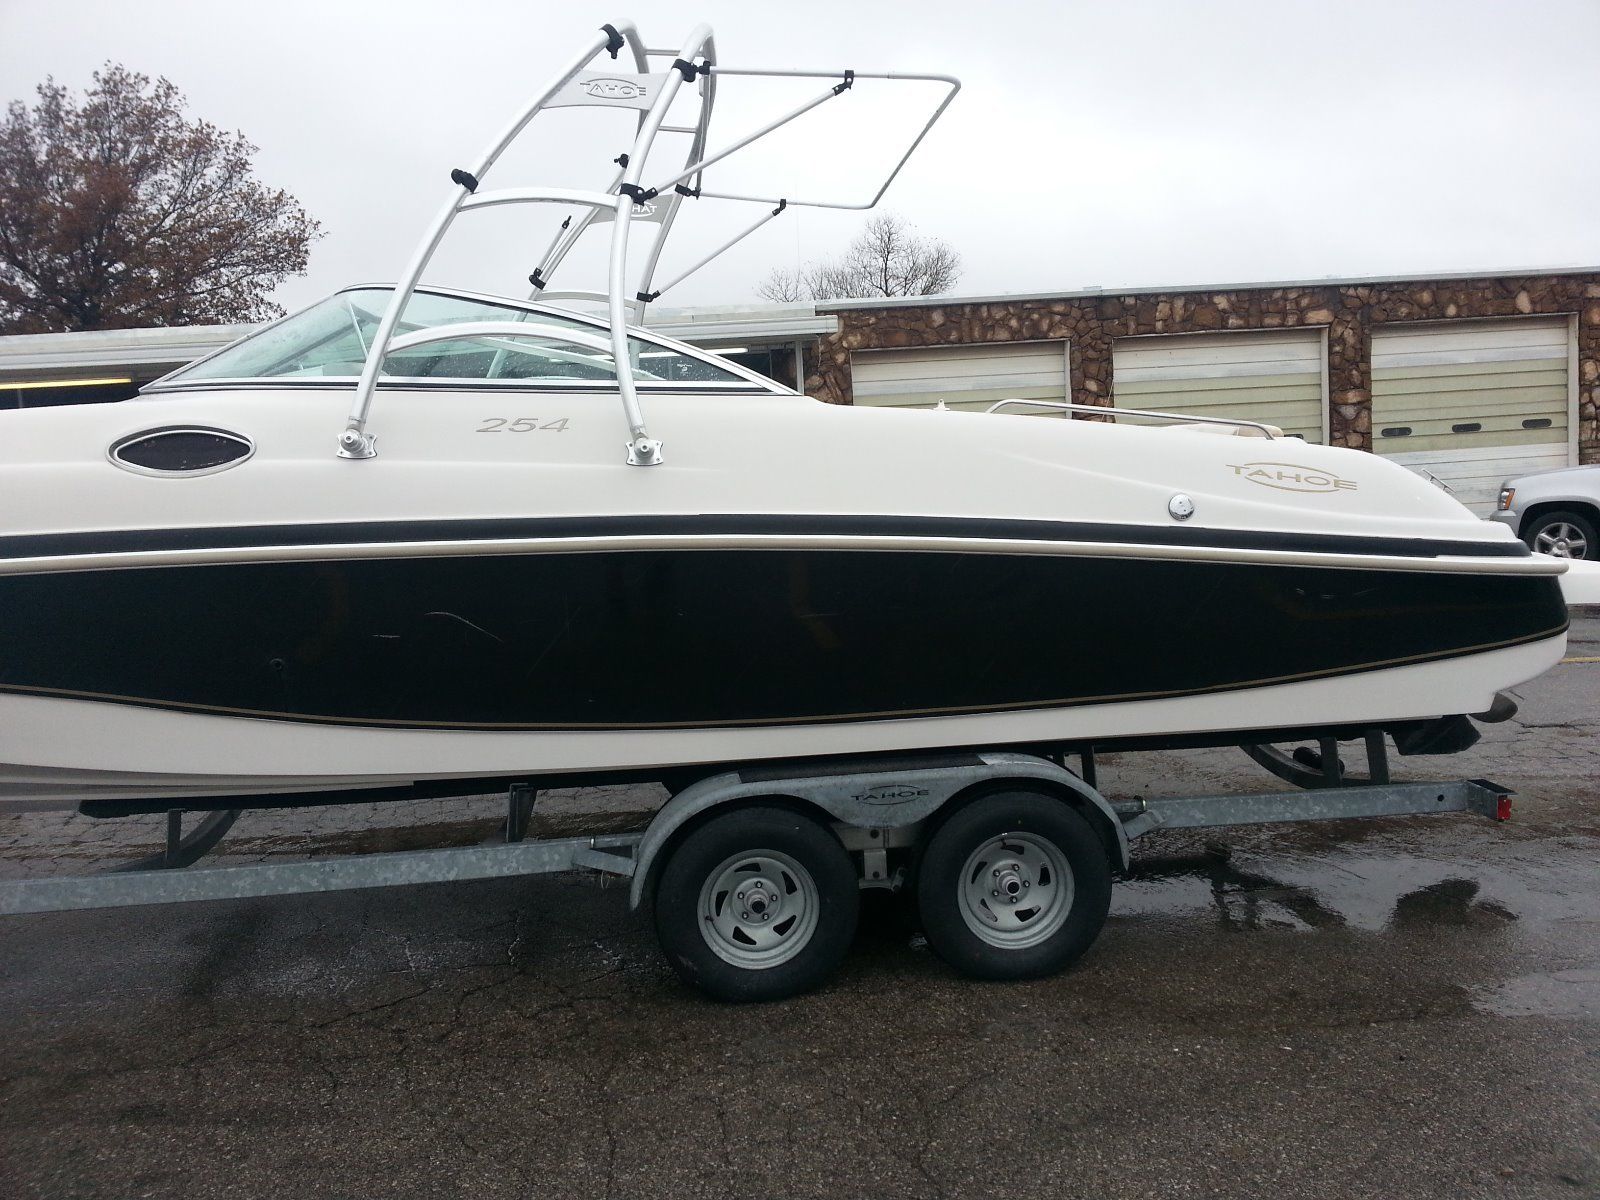 tahoe 254 deck 2004 for sale for $12,500 - boats-from-usa.com